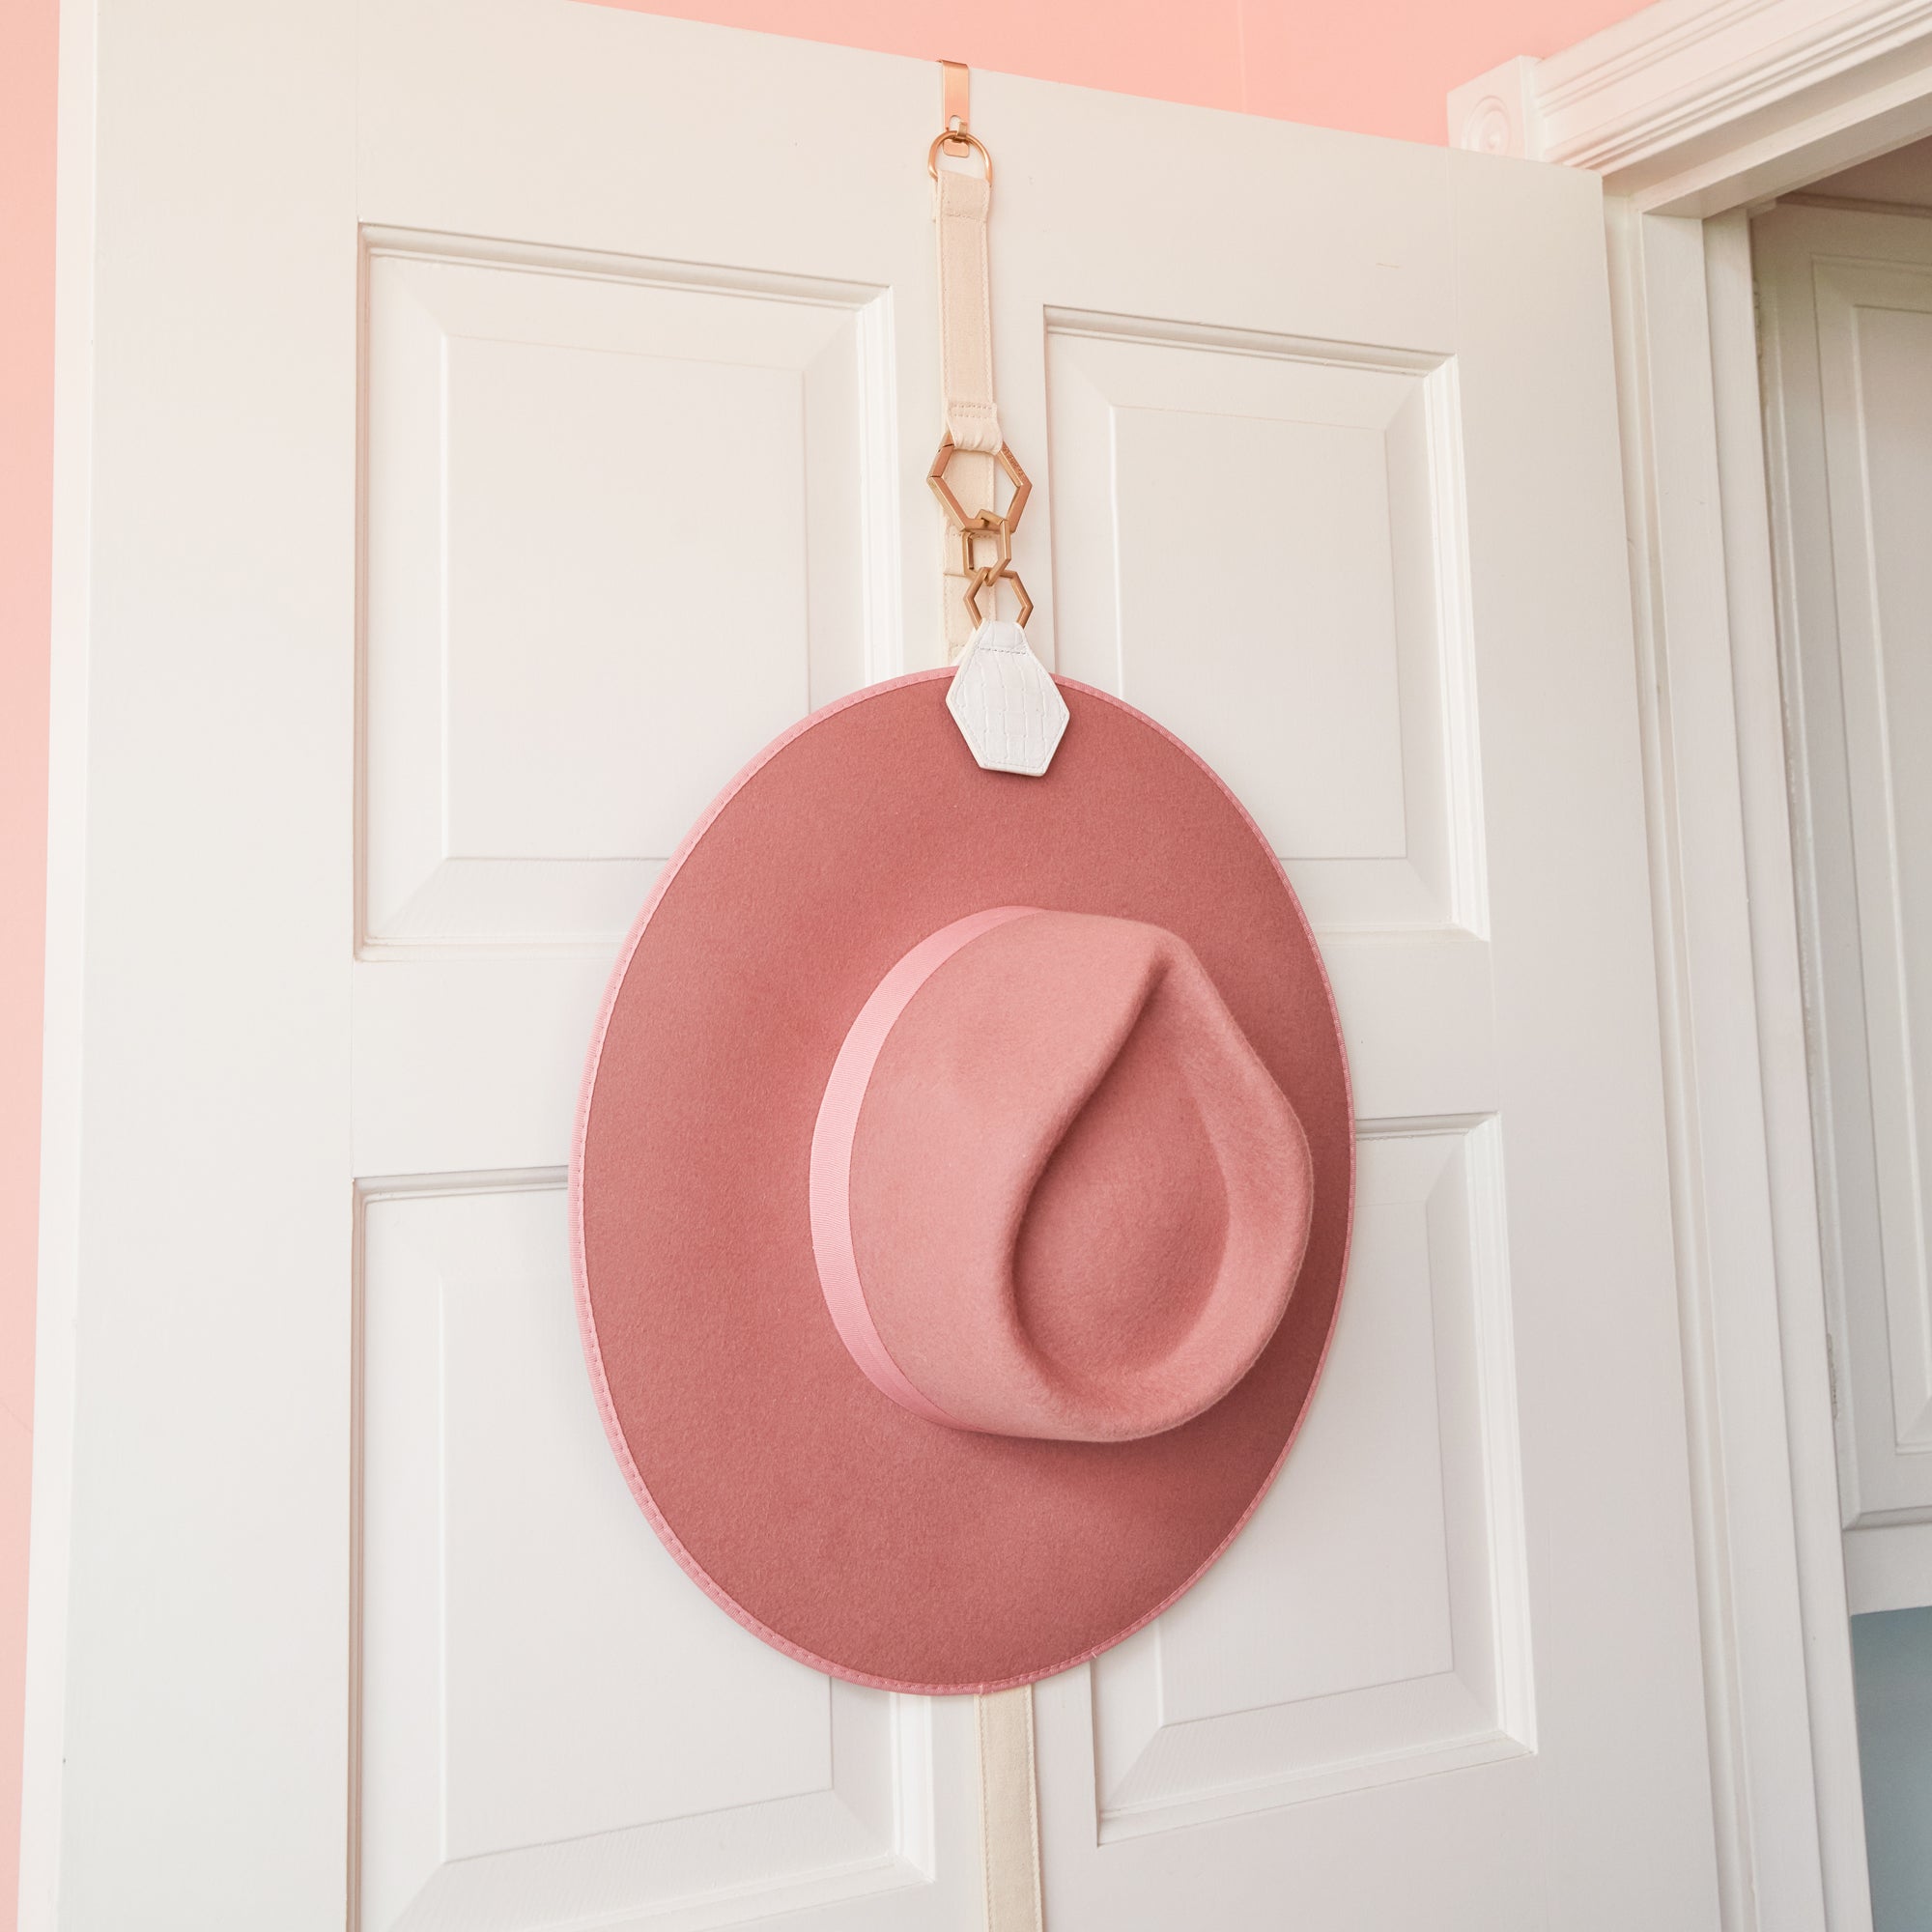  the collector hat organizer organizes your hats like a hat rack on your door